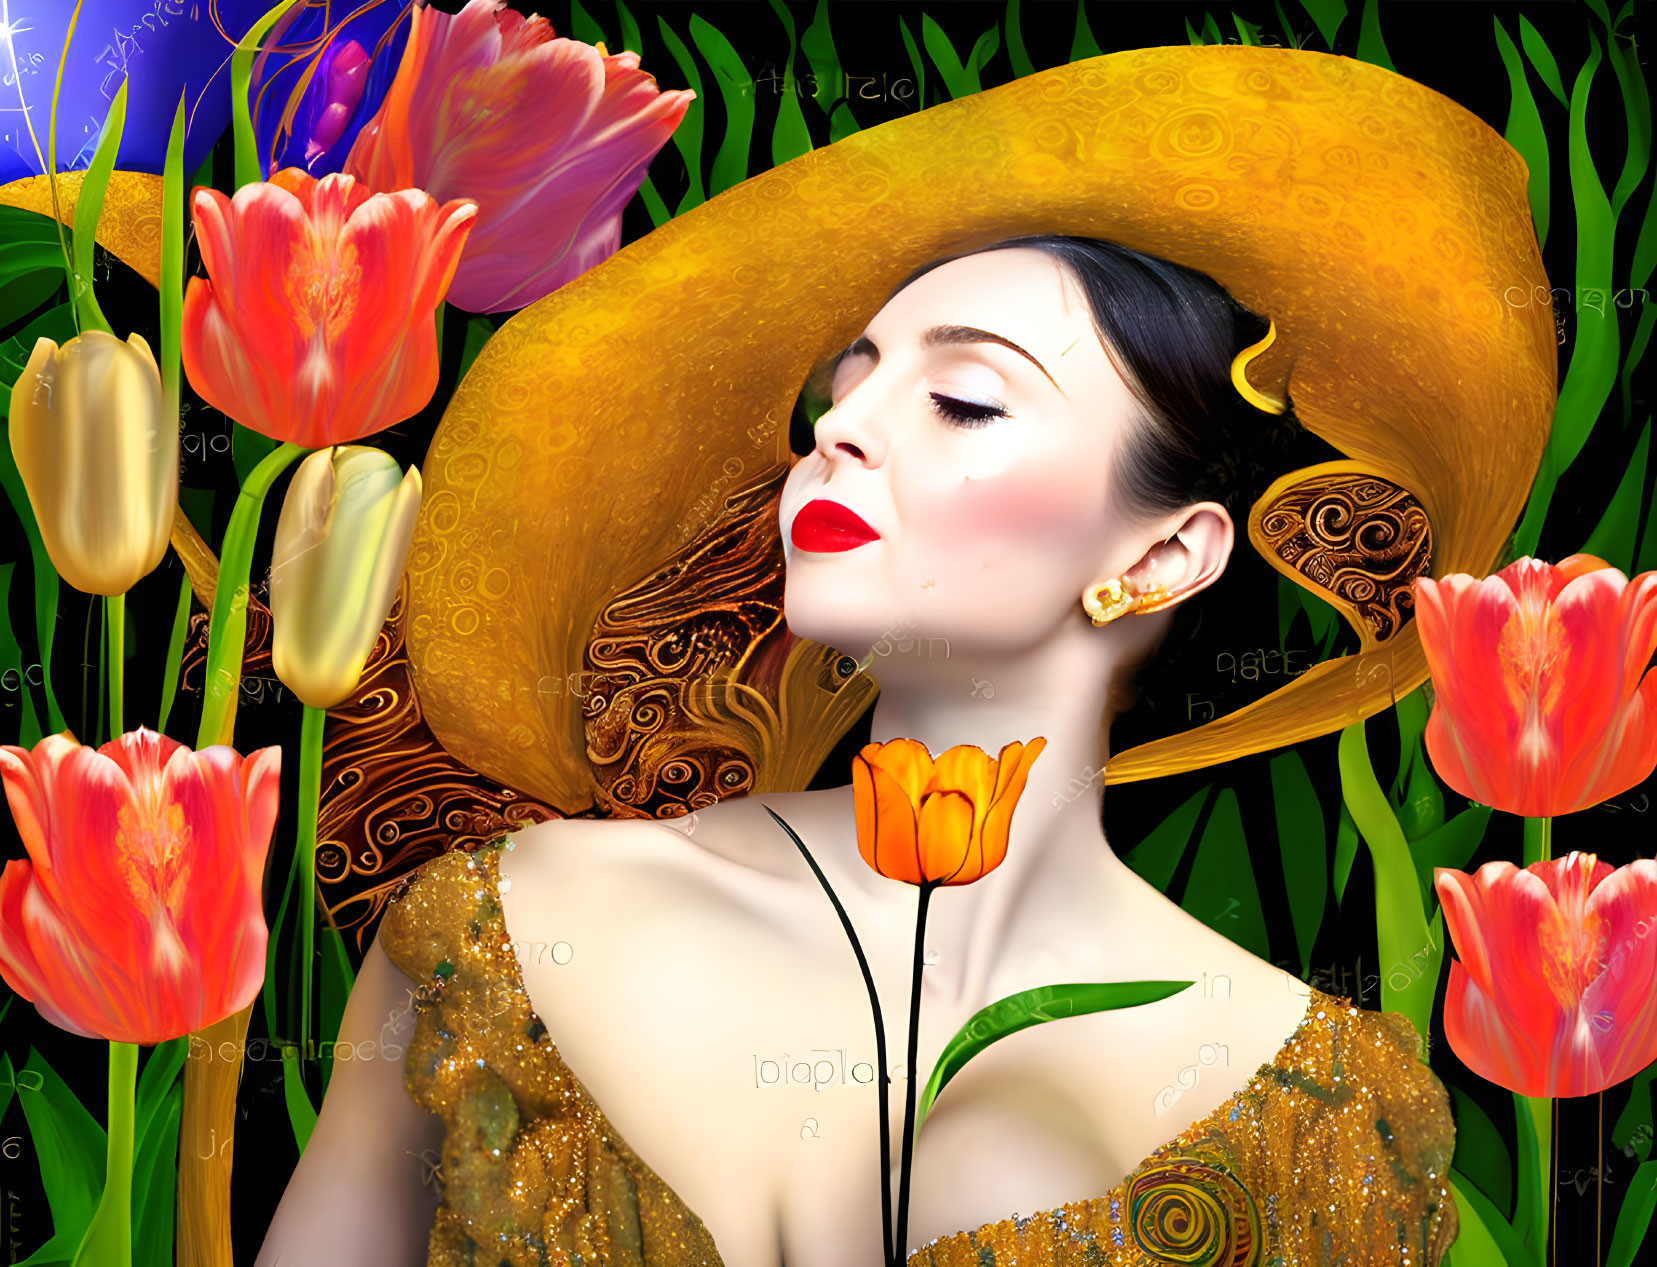 Lady with Tulips (1)